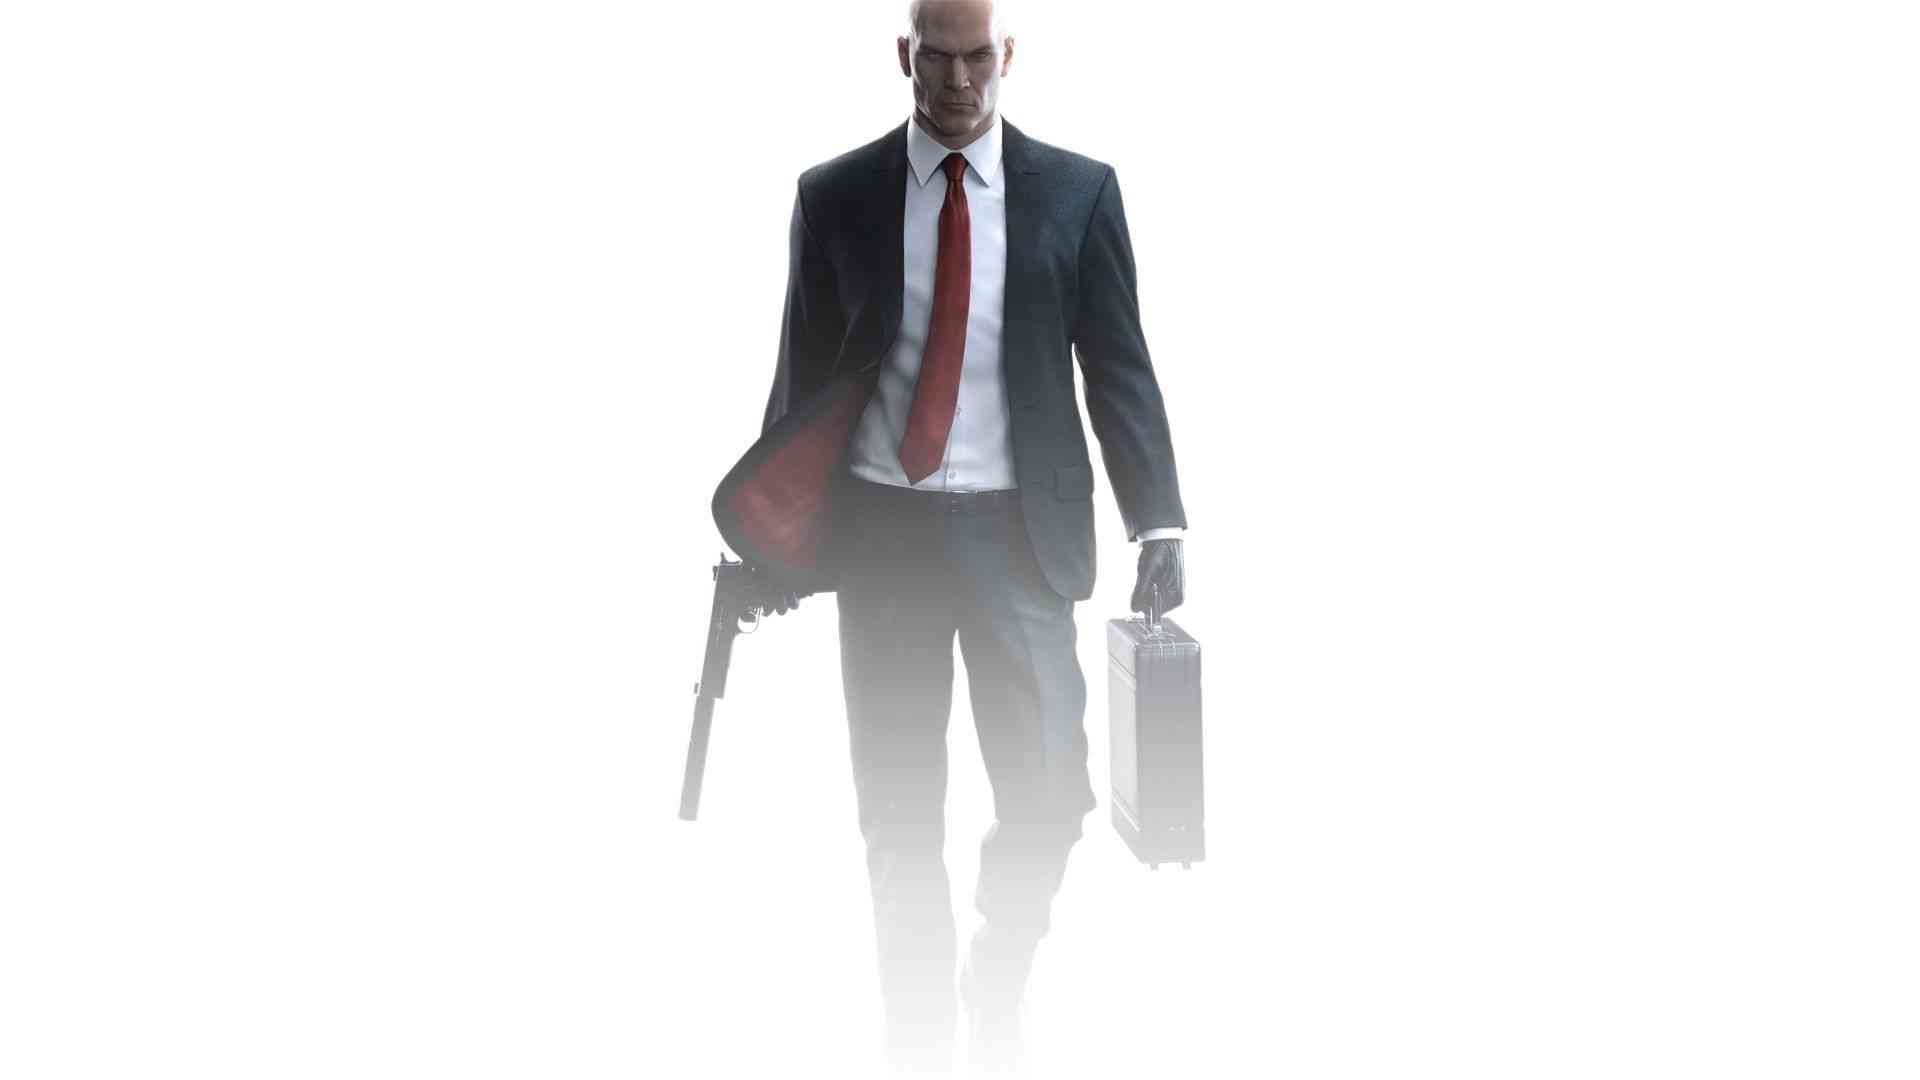 agent 47s iconic briefcase returns in new how to hitman video 437 big 1